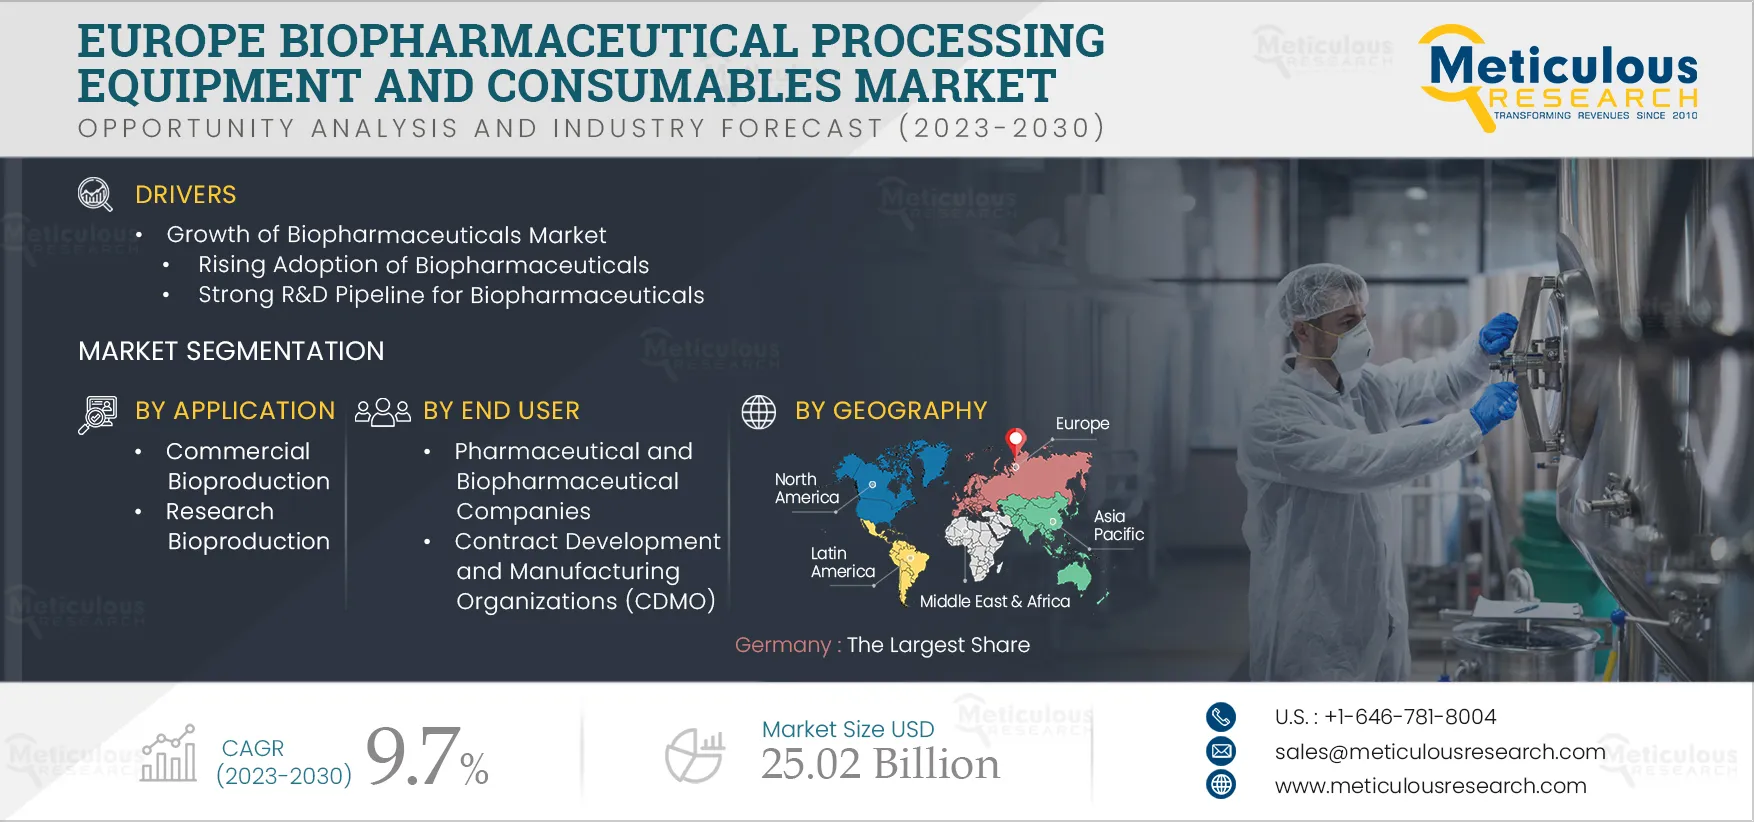 Europe Biopharmaceutical Processing Equipment and Consumables Market